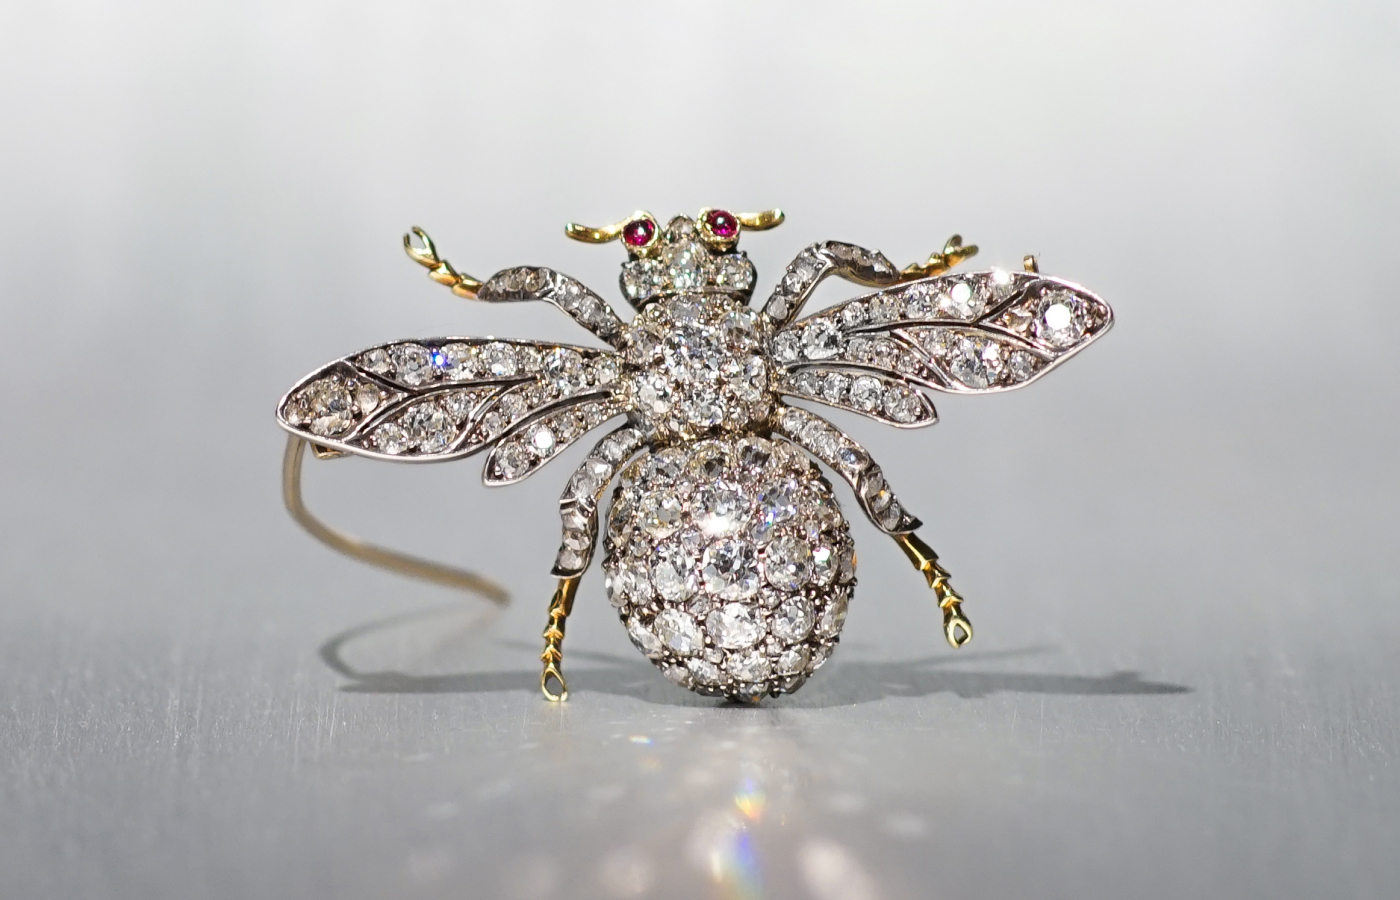 A La Vieille Russie will present this old mine-cut diamond Bee brooch at TEFAF Maastricht from March 9-14, 2024